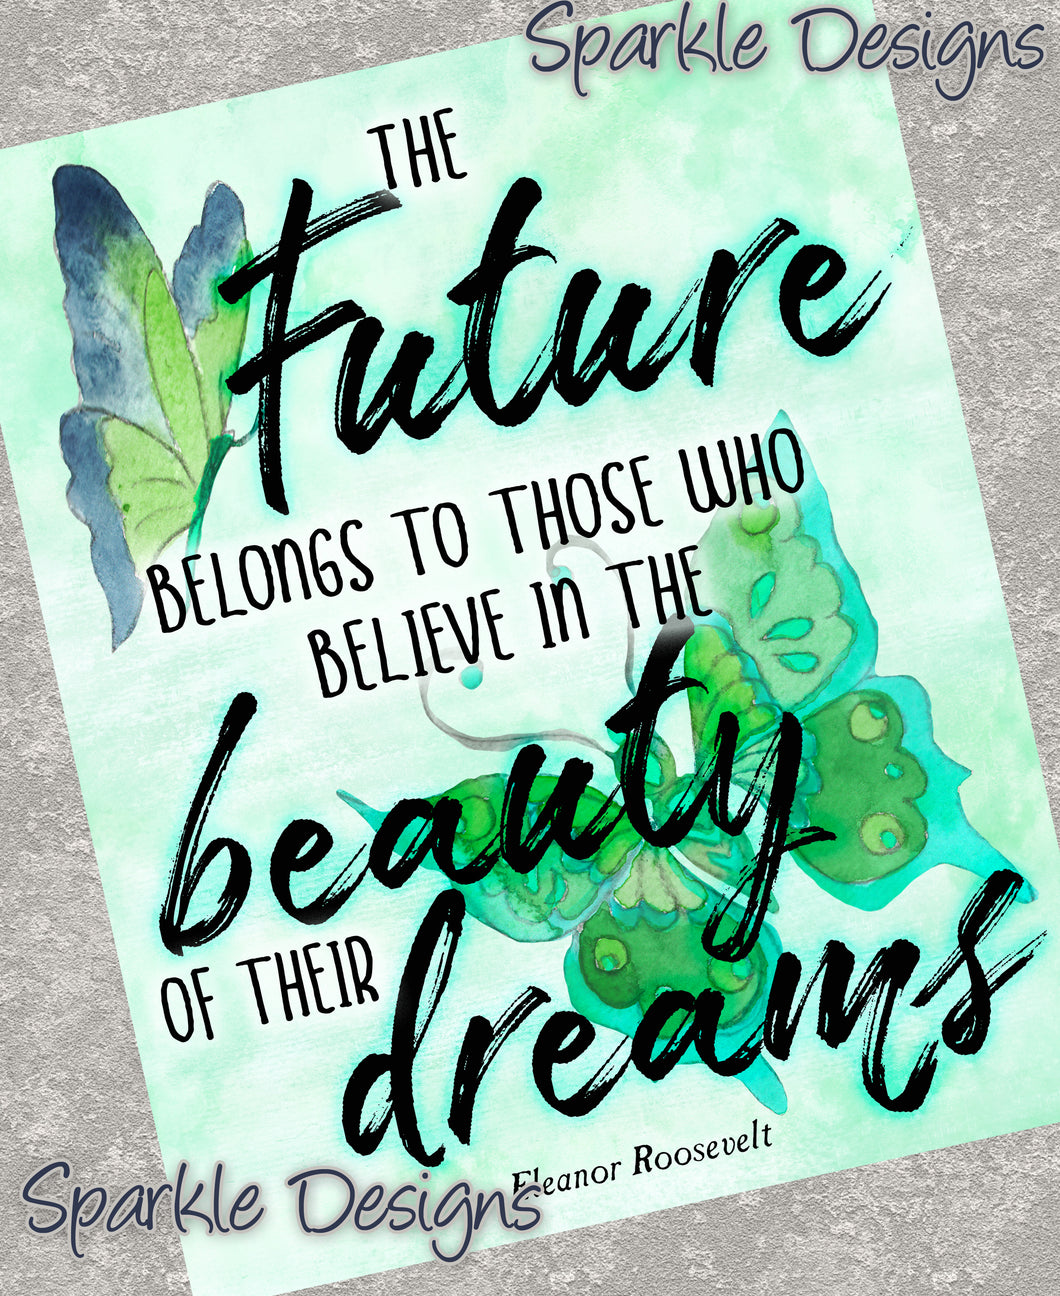 Beauty of their dreams - Eleanor Roosevelt 233 Magnet